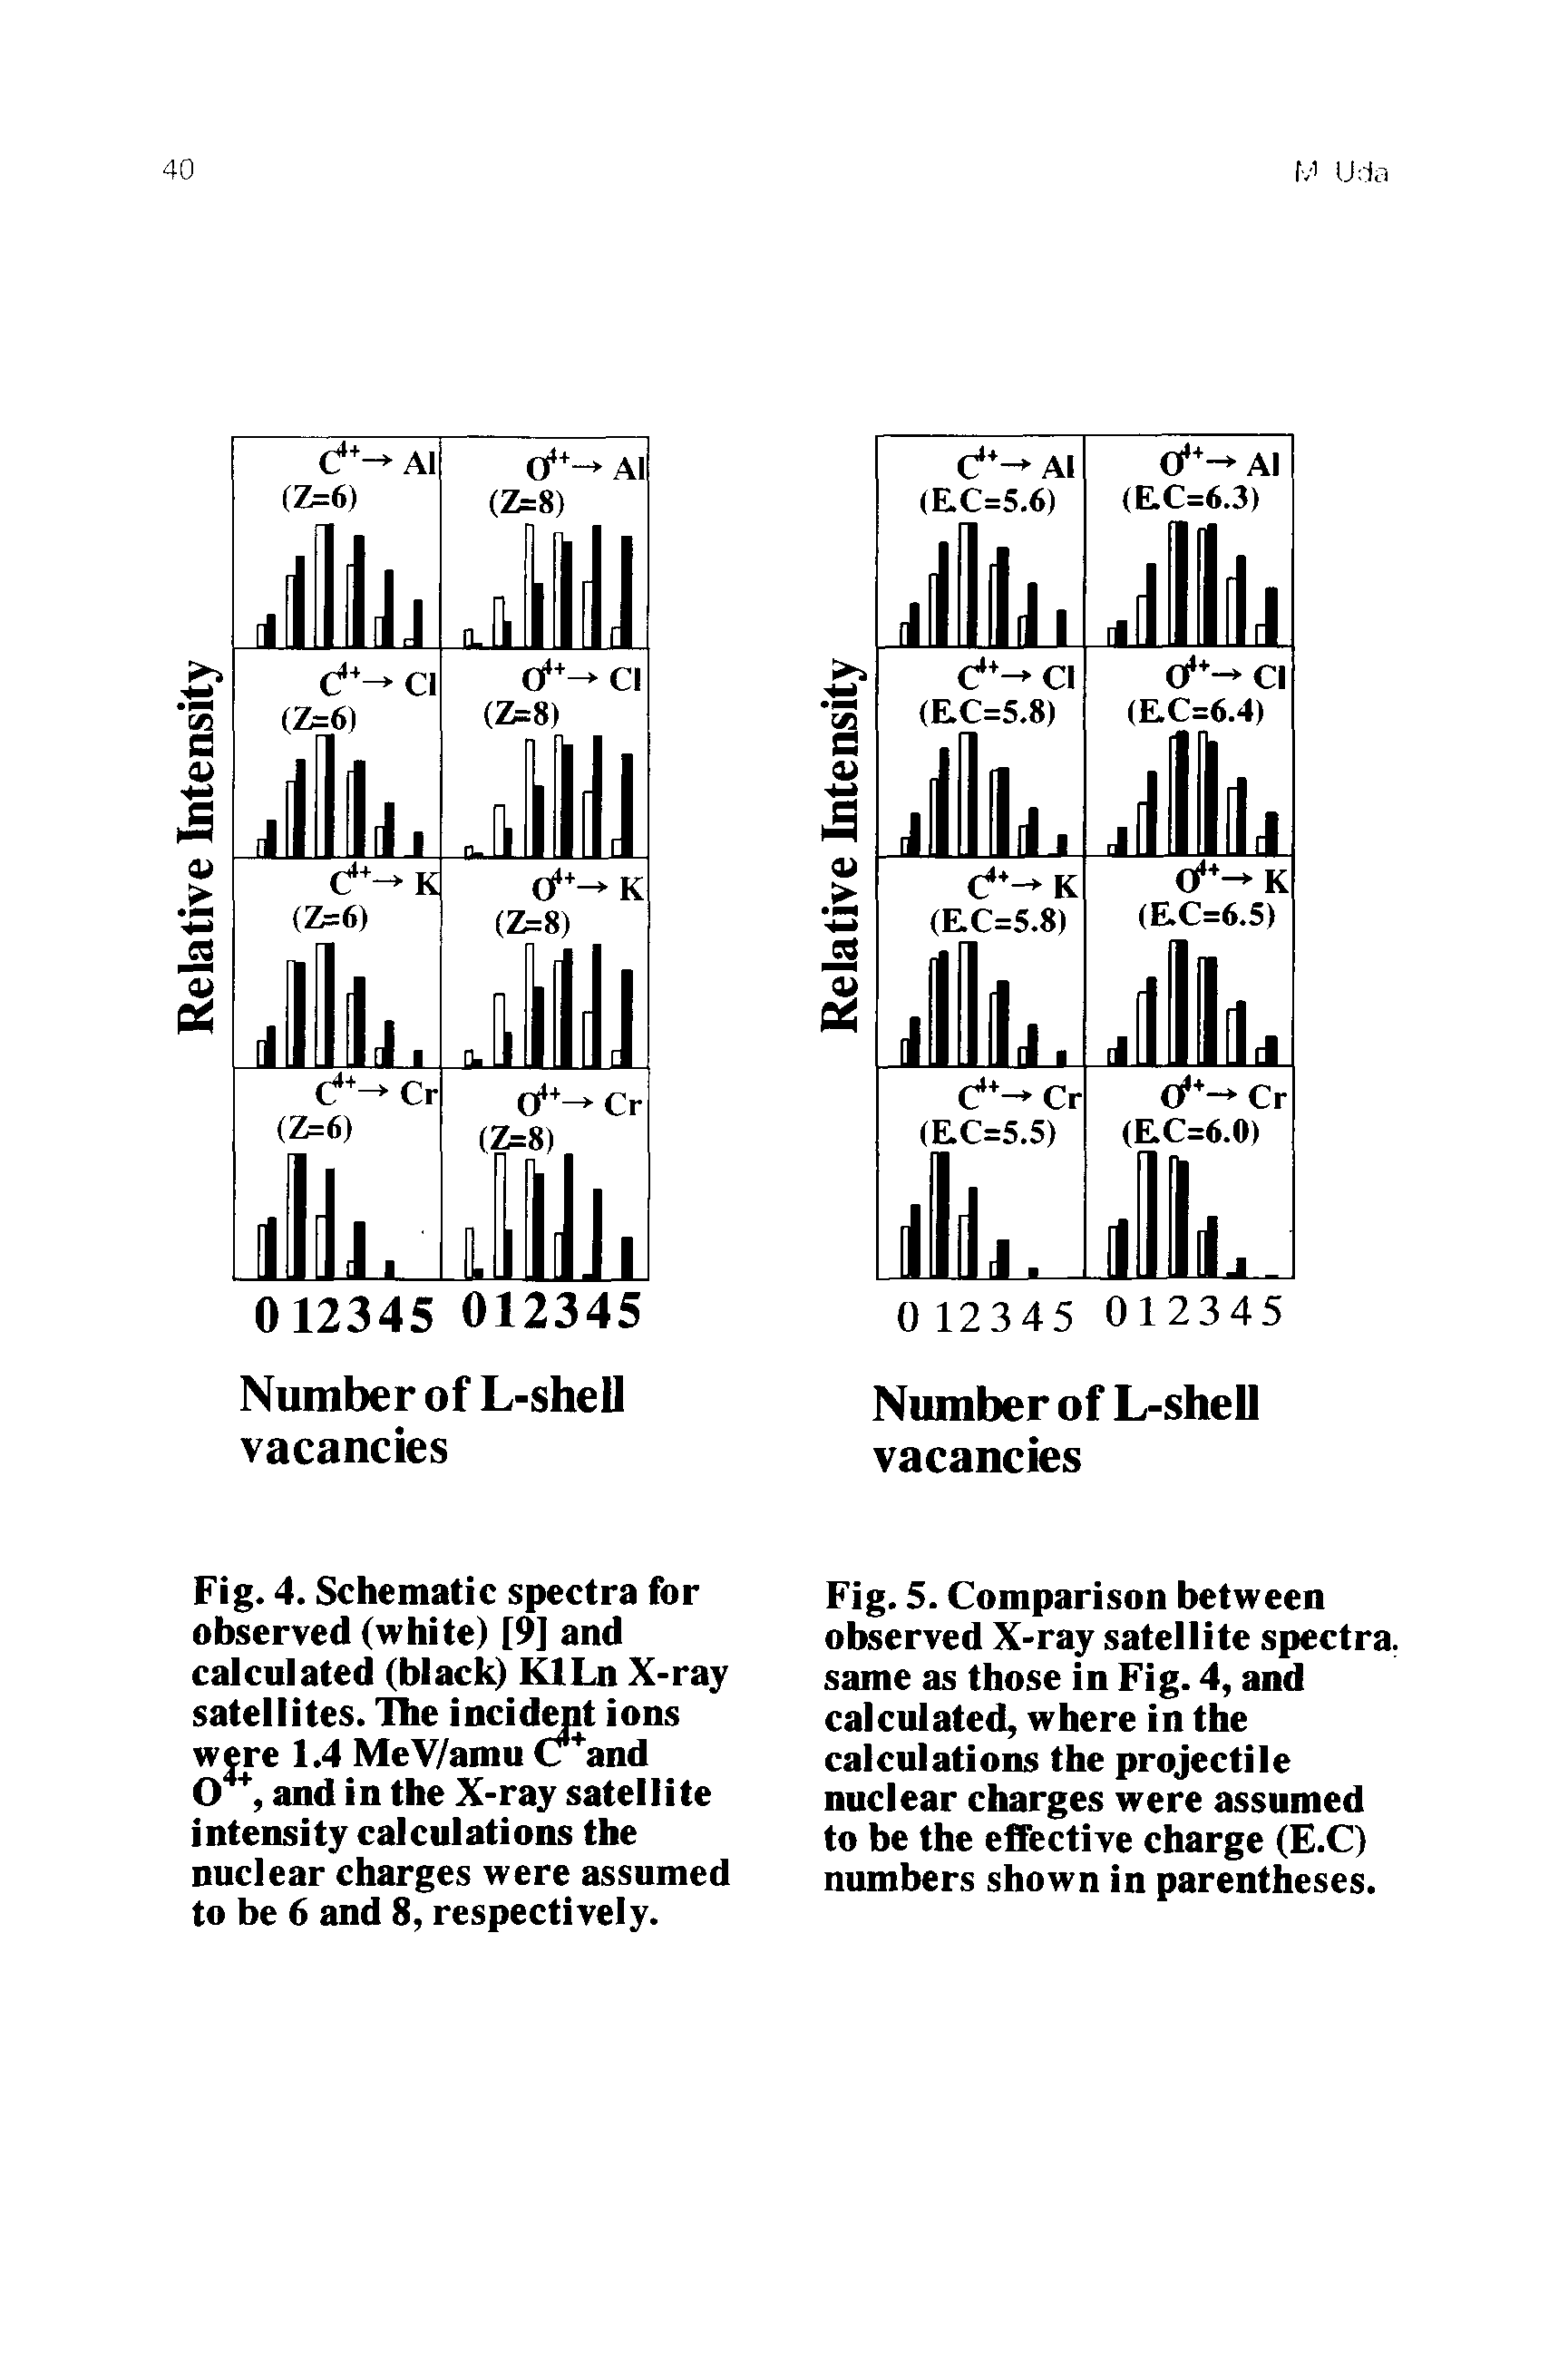 Fig. 5. Comparison between observed X-ray satellite spectra, same as those in Fig. 4, and calculated, where in the calculations the projectile nuclear charges were assumed to be the effective charge (E.C) numbers shown in parentheses.